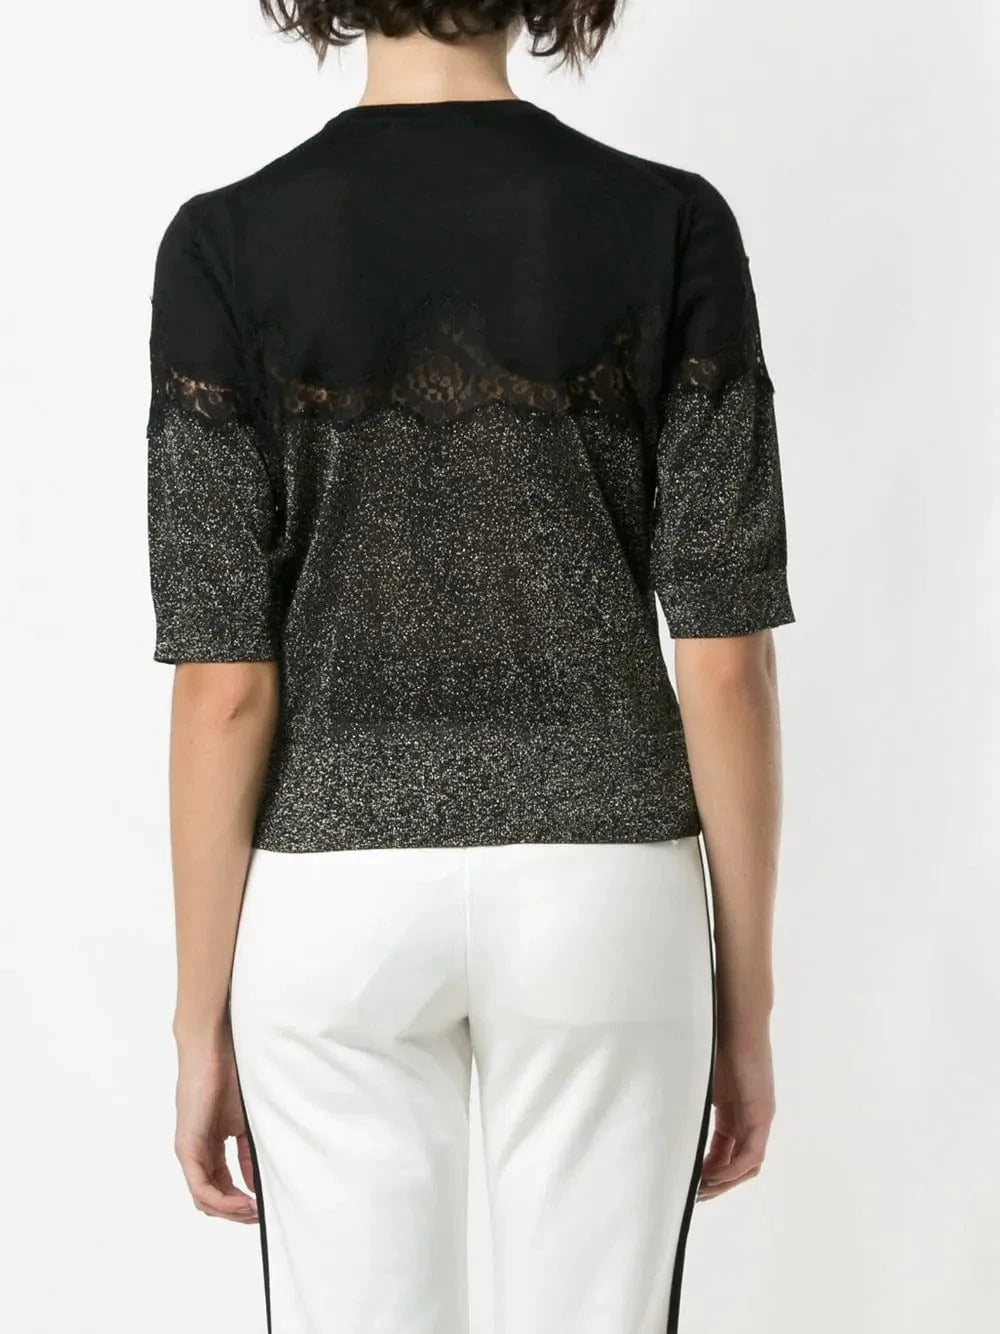 Dolce & Gabbana Lace-Trimmed Knit Sweater